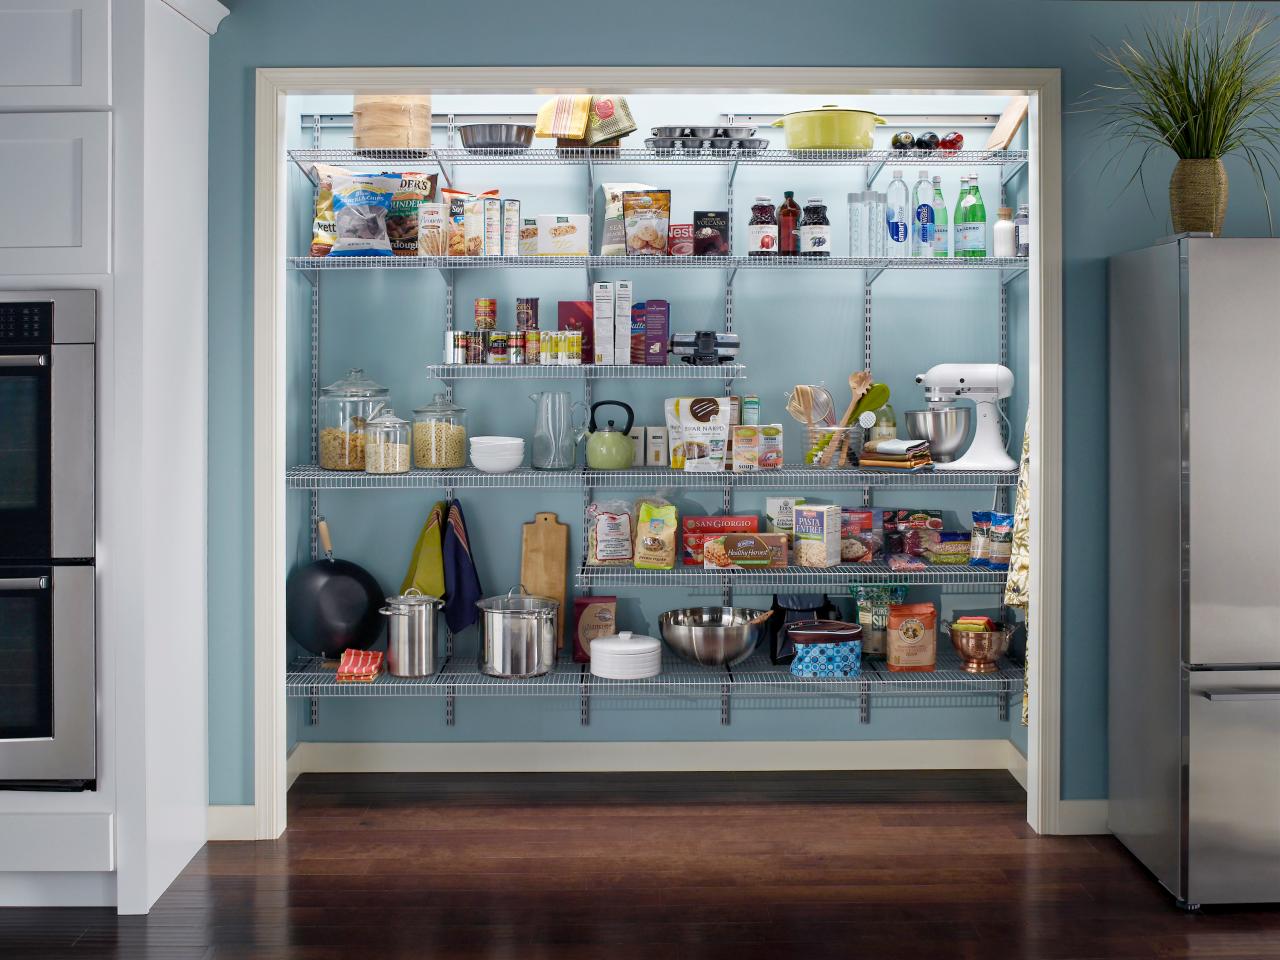 51 Pictures Of Kitchen Pantry Designs, Cupboard Shelving Ideas